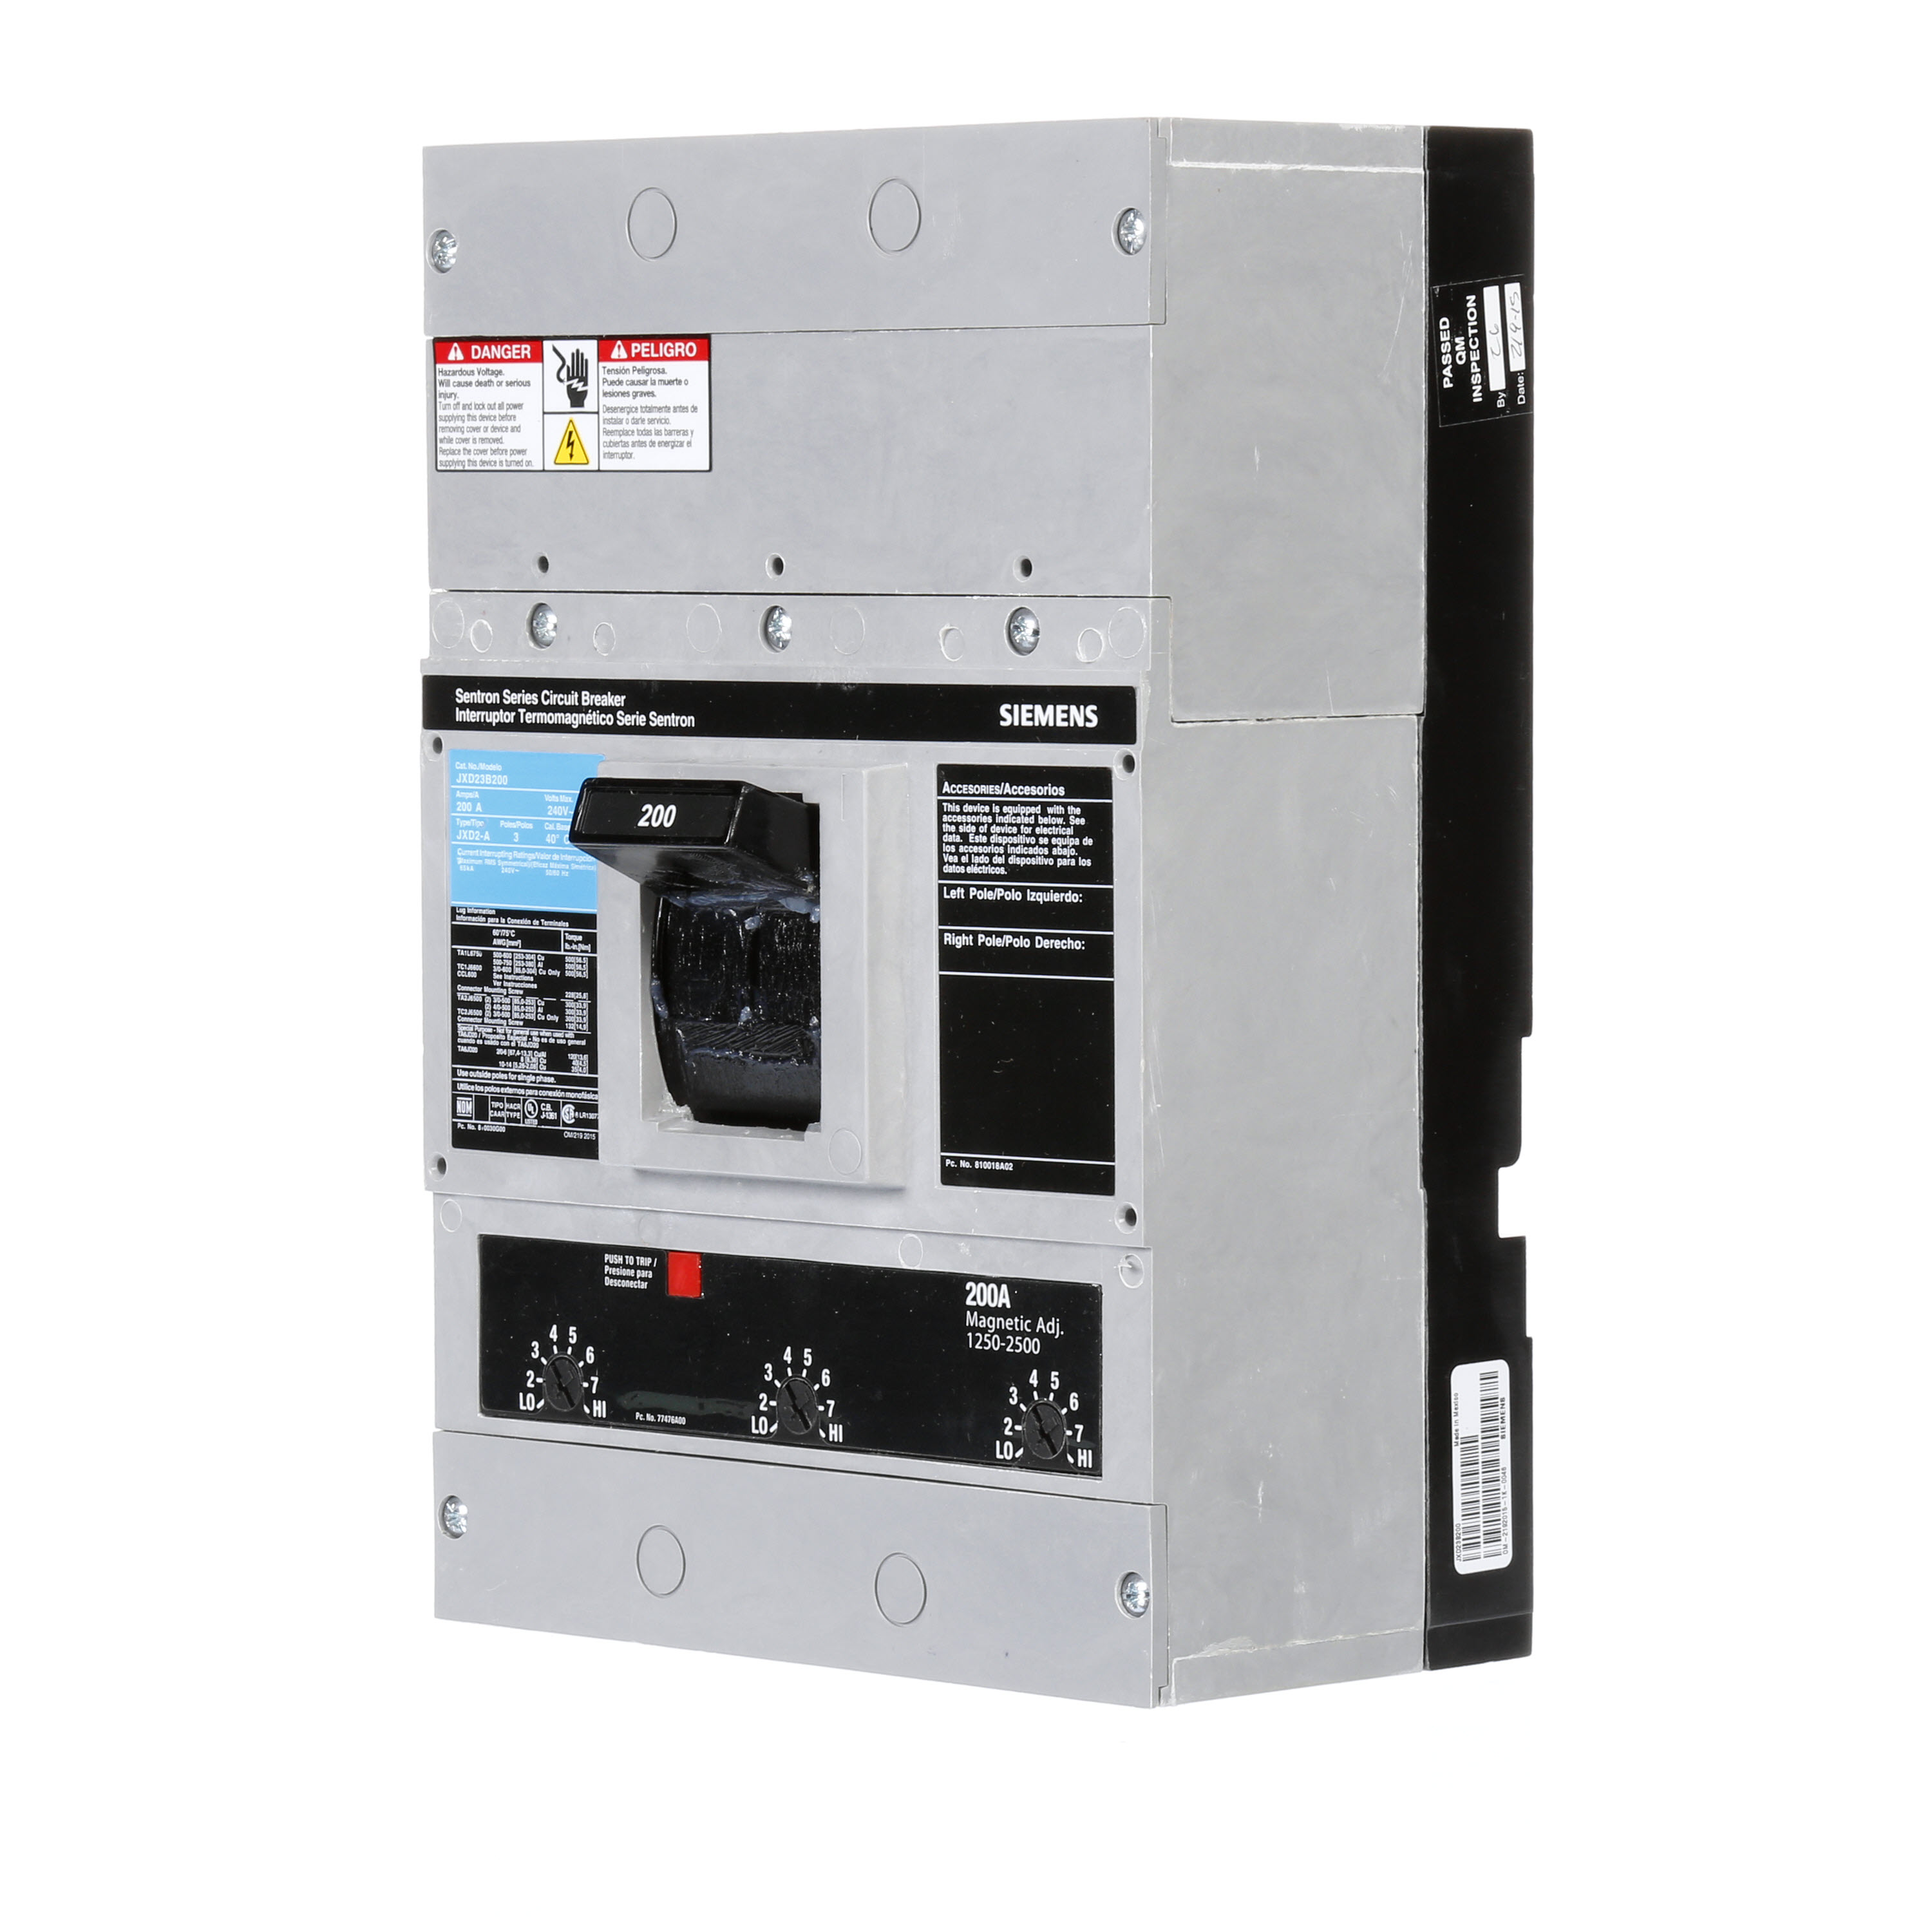 SIEMENS LOW VOLTAGE SENTRON MOLDED CASE CIRCUIT BREAKER WITH THERMAL - MAGNETICTRIP UNIT. ASSEMBLED STANDARD 40 DEG C BREAKER JD FRAME WITH STANDARD BREAKING CAPACITY. 200A 3-POLE (65KAIC AT 240V). NON-INTERCHANGEABLE TRIP UNIT. SPECIAL FEATURES NO LUGS INSTALLED. DIMENSIONS (W x H x D) IN 7.50 x 11.0 x 4.00.